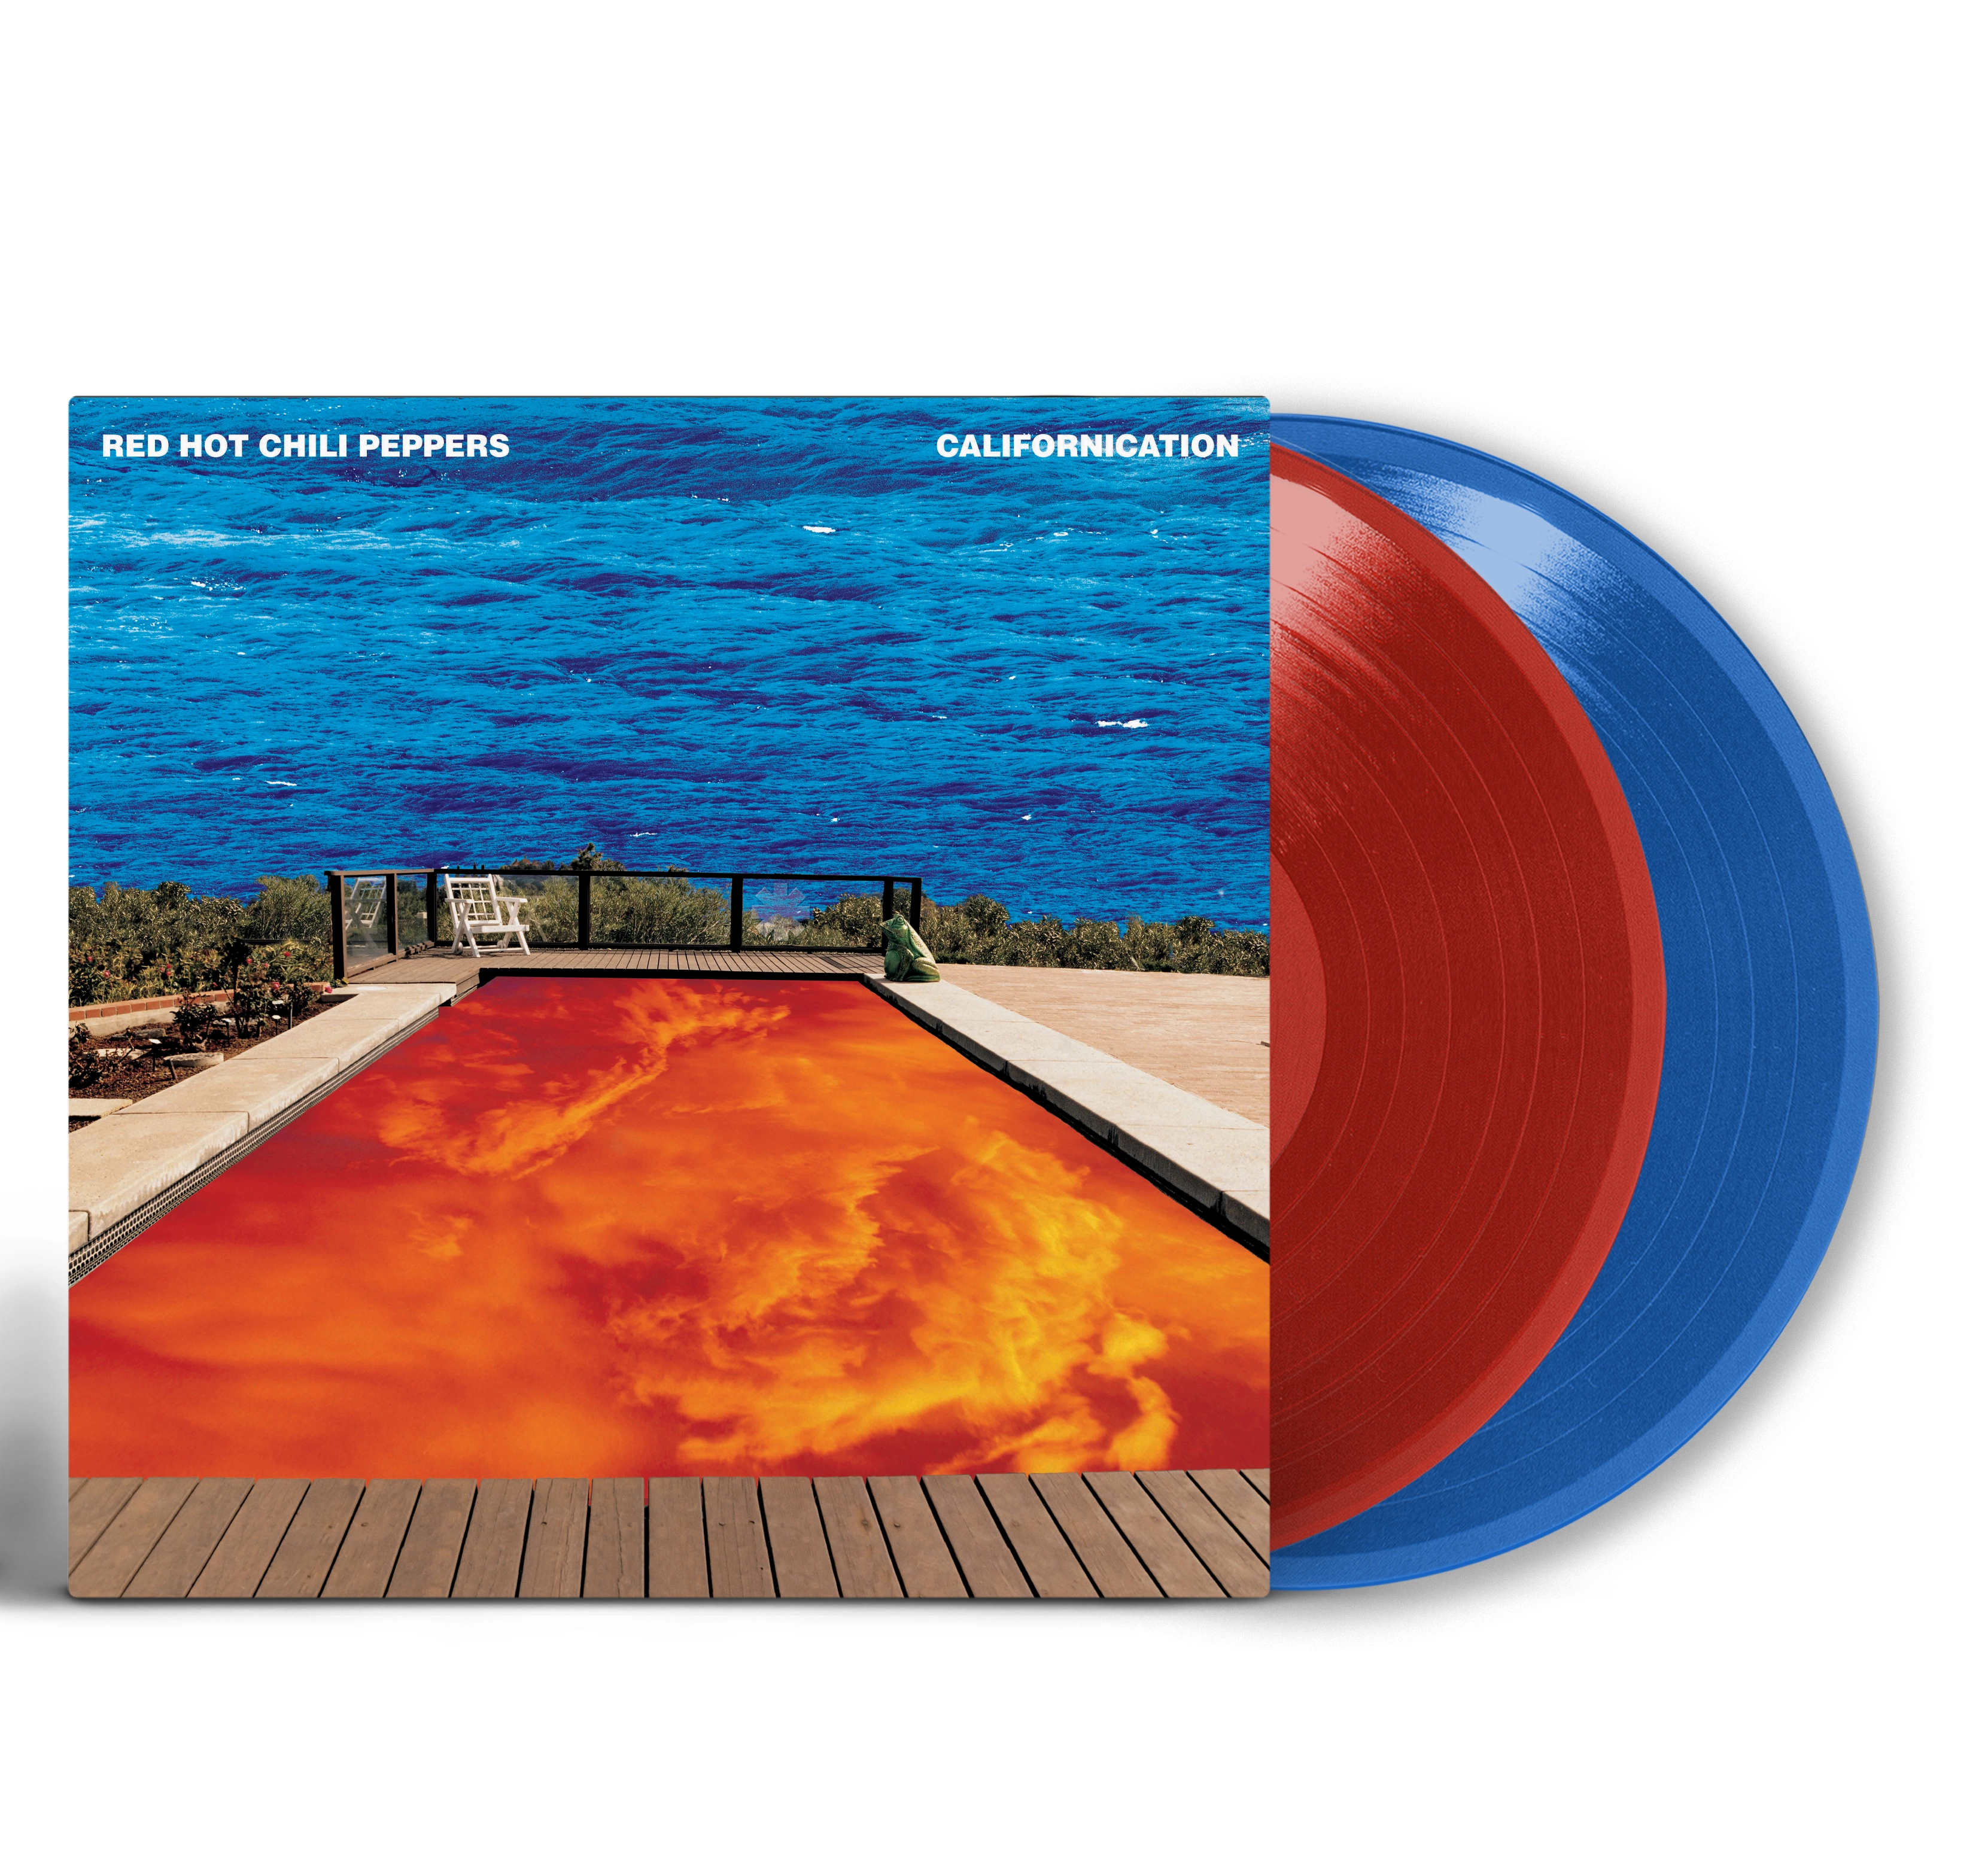 RED HOT CHILI PEPPERS - Californication [RED/OCEAN BLUE DLP]